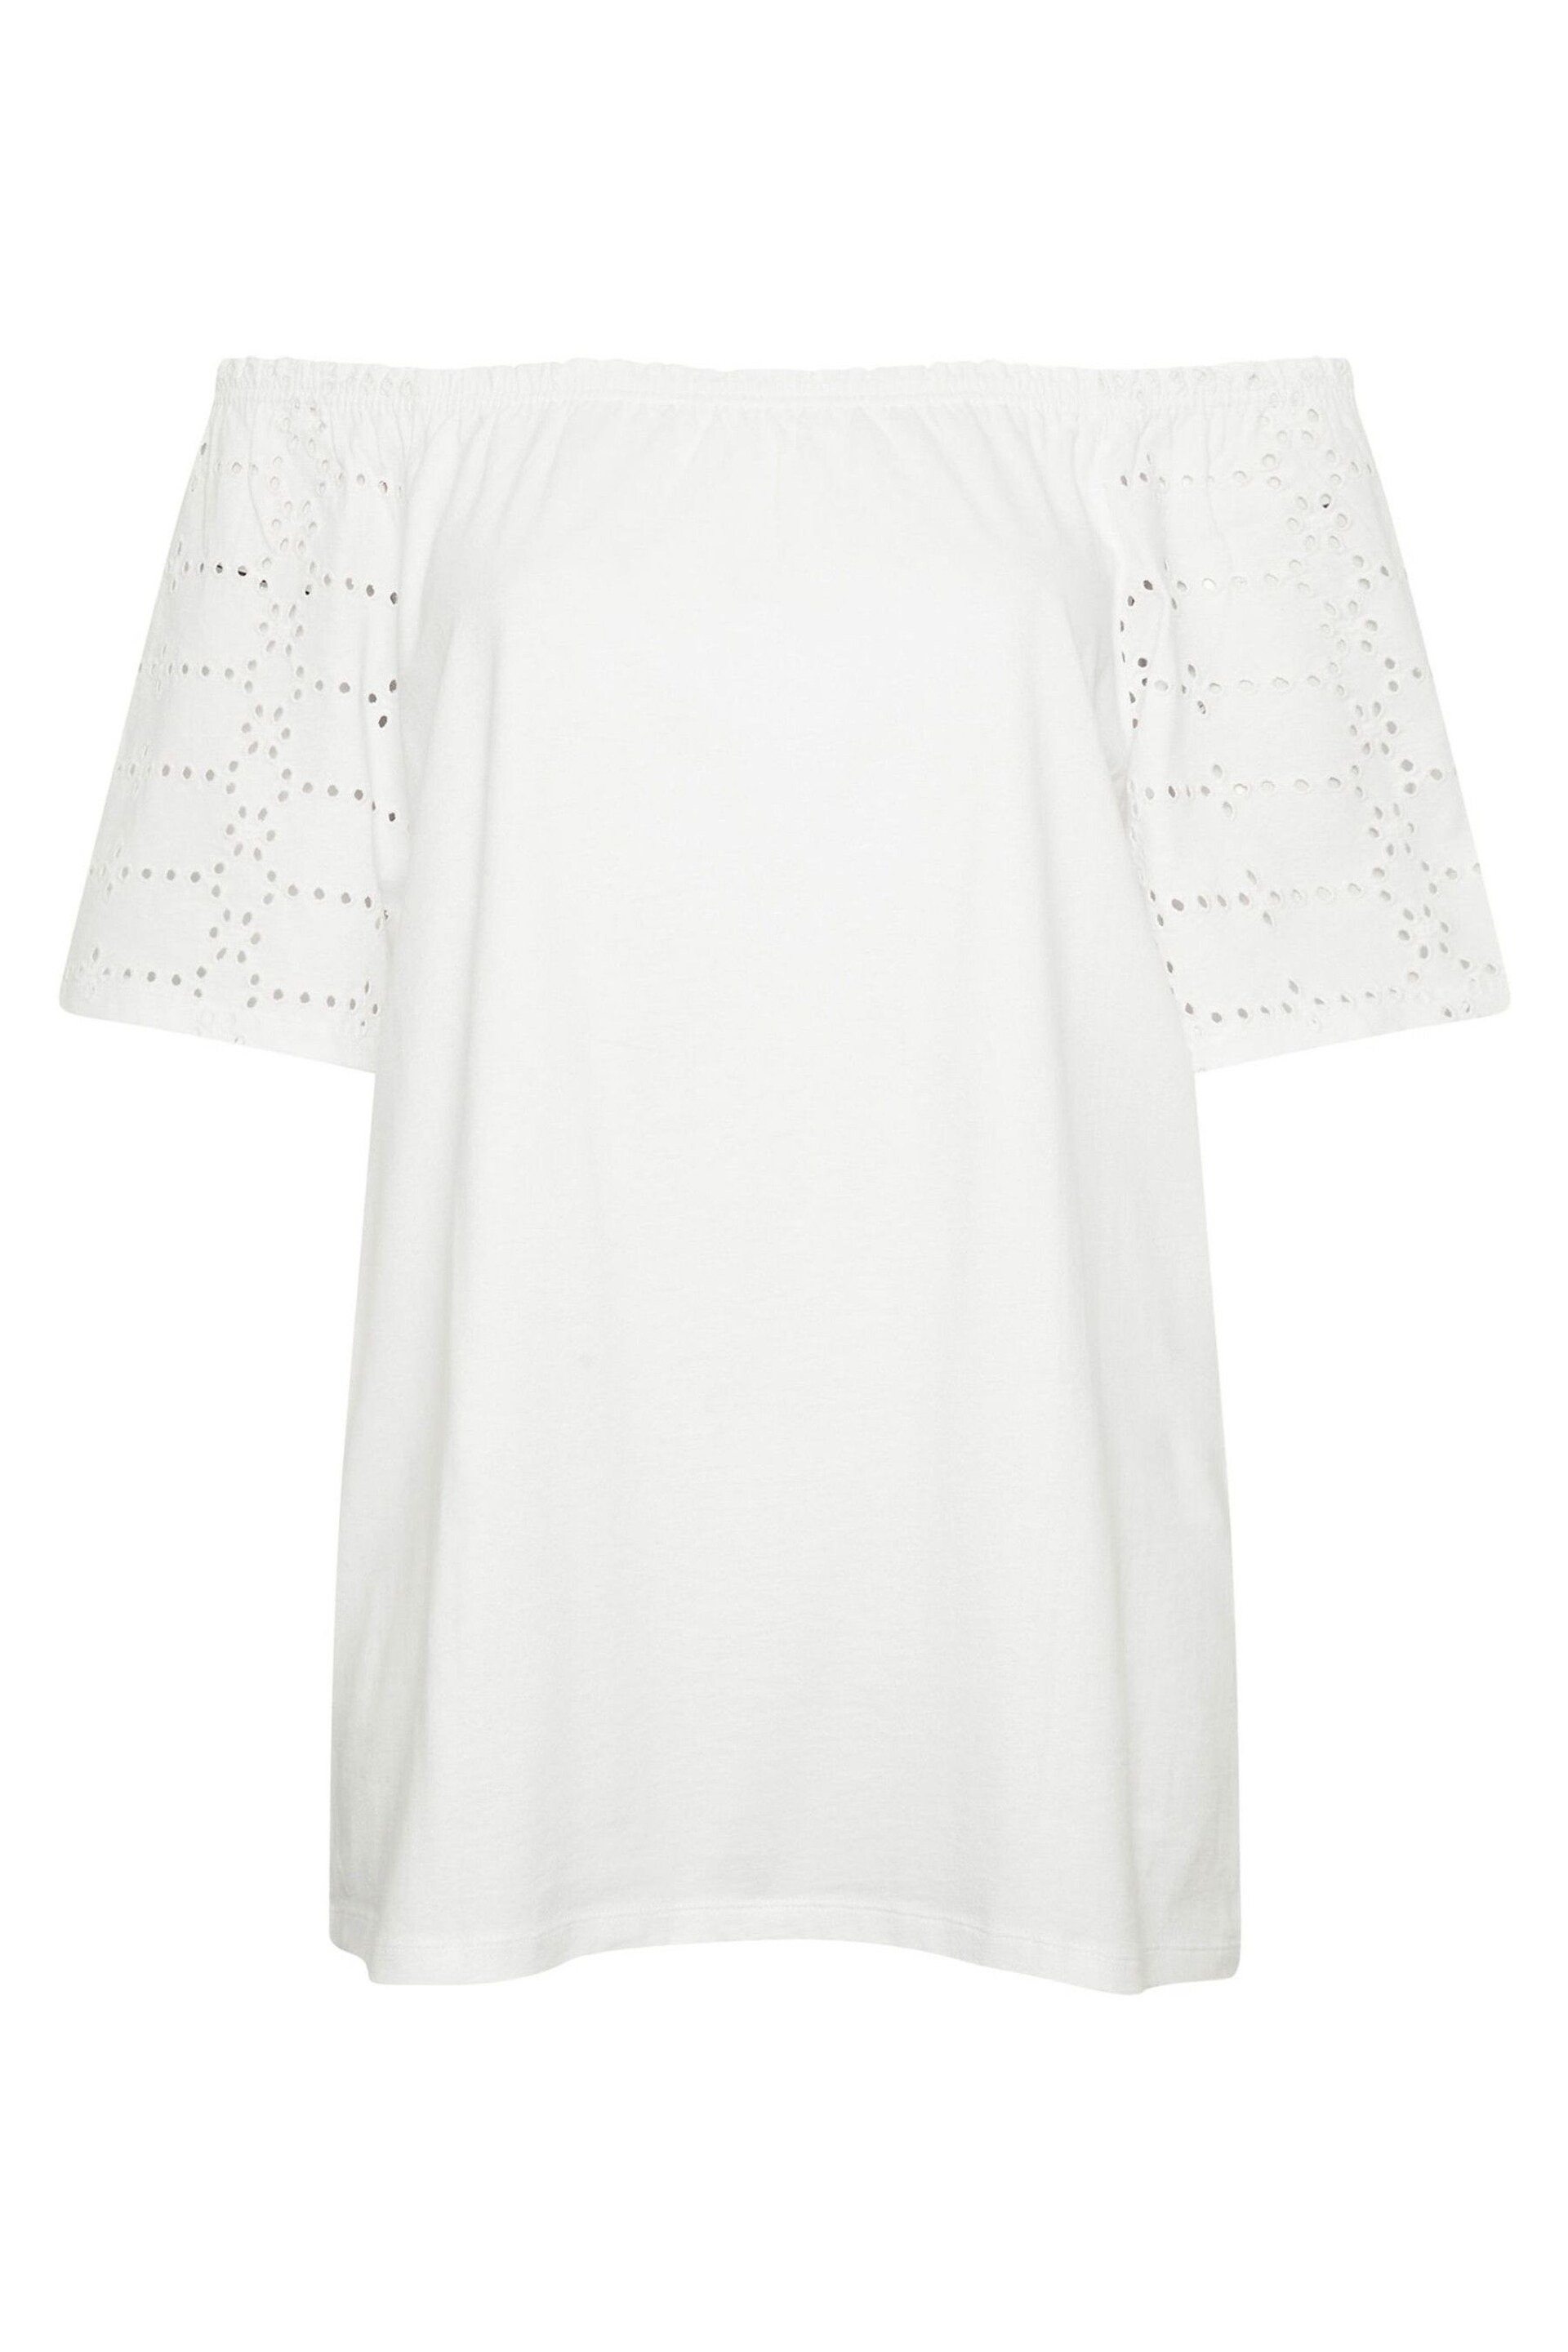 Yours Curve White White Broderie Anglaise Bardot Top - Image 5 of 5